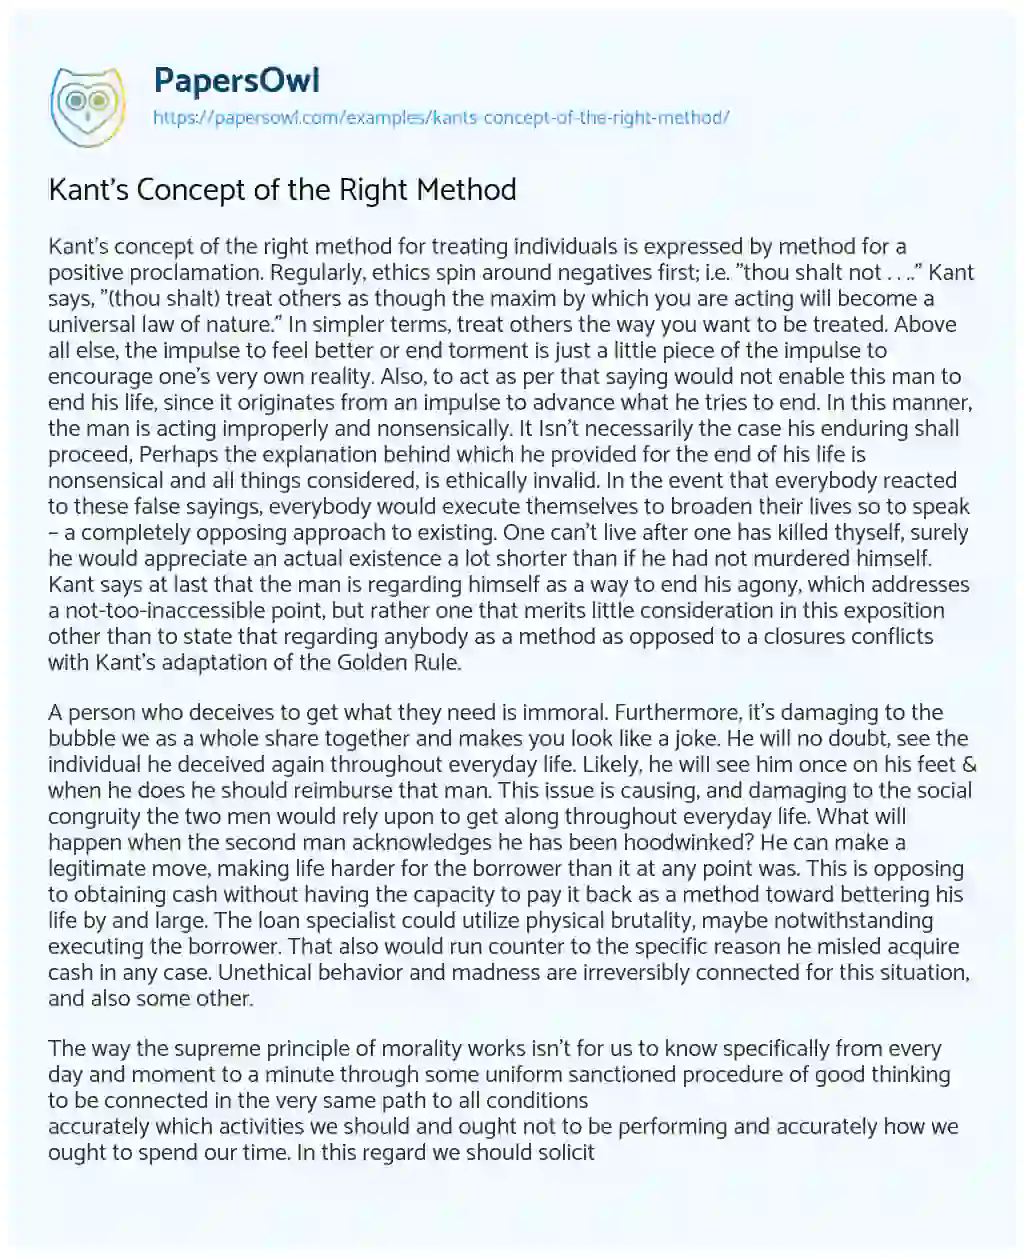 Kant’s Concept of the Right Method essay